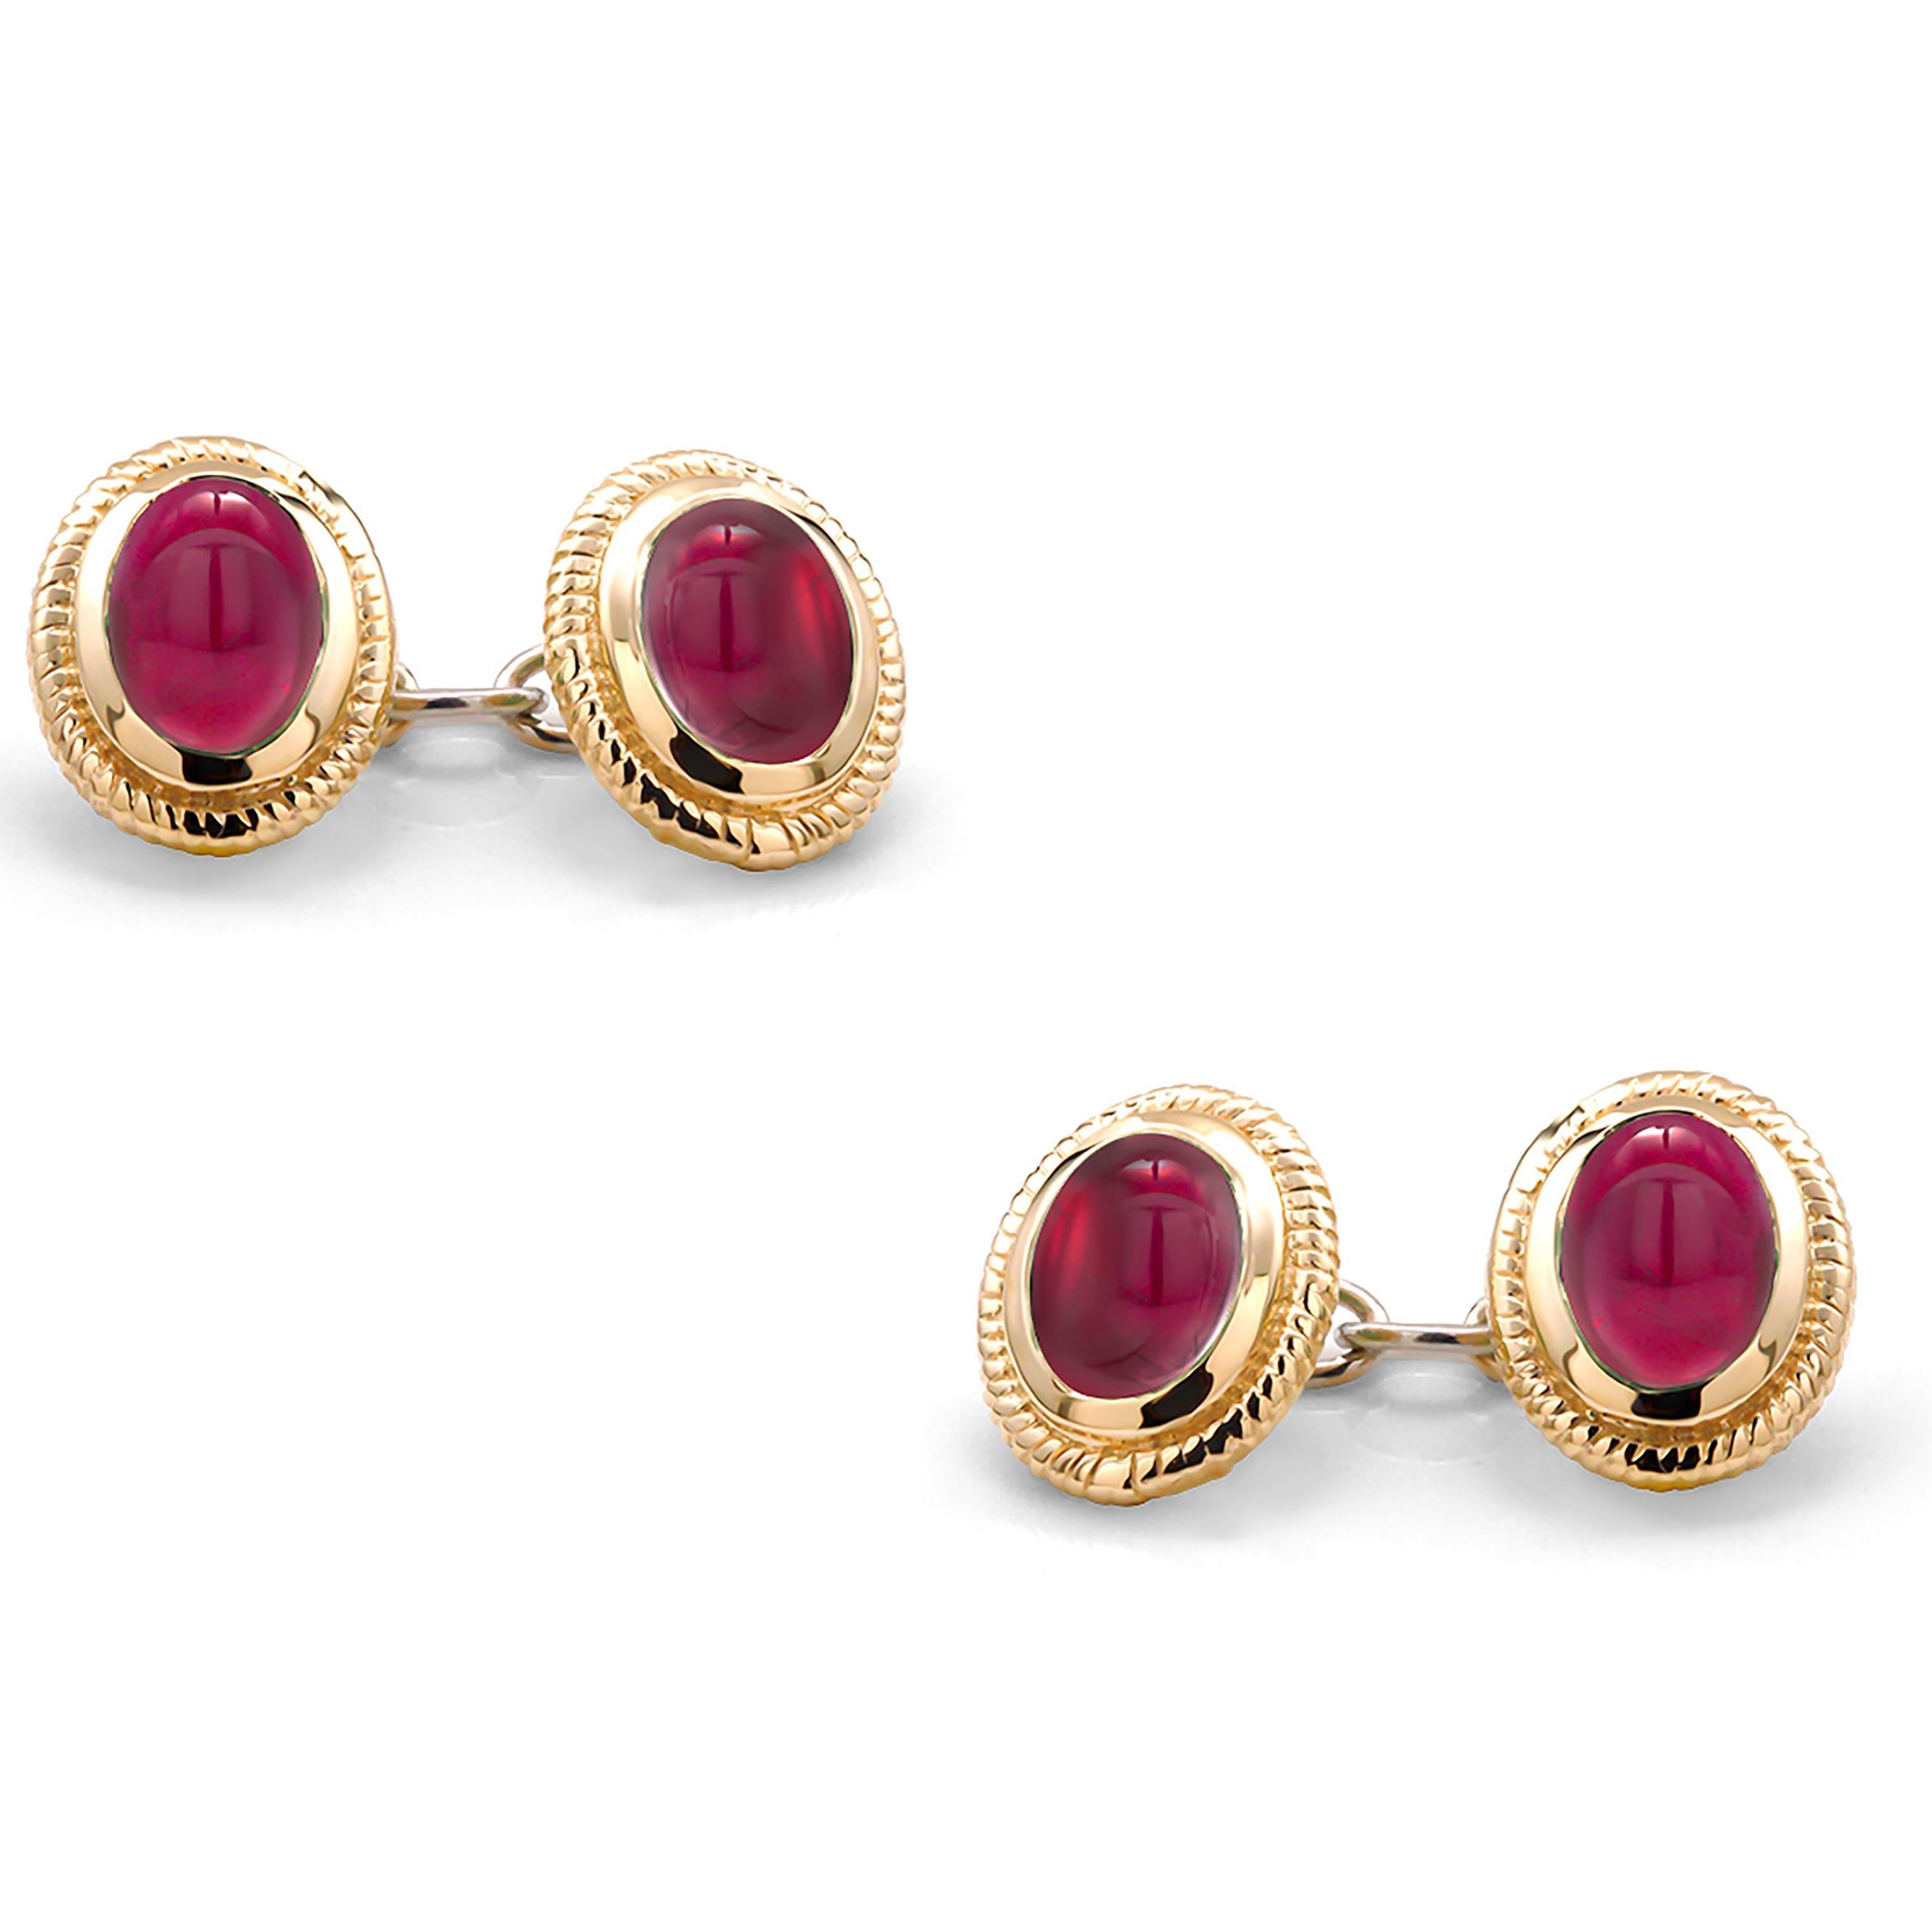 14 karats yellow gold fabulous pair of matched men’s double-sided chain link cufflinks
Four matching vibrant and vivid cabochons red ruby weighing 4.70 carats
The rubies tone color is of full-bodied crimson red hue
Cufflinks measuring